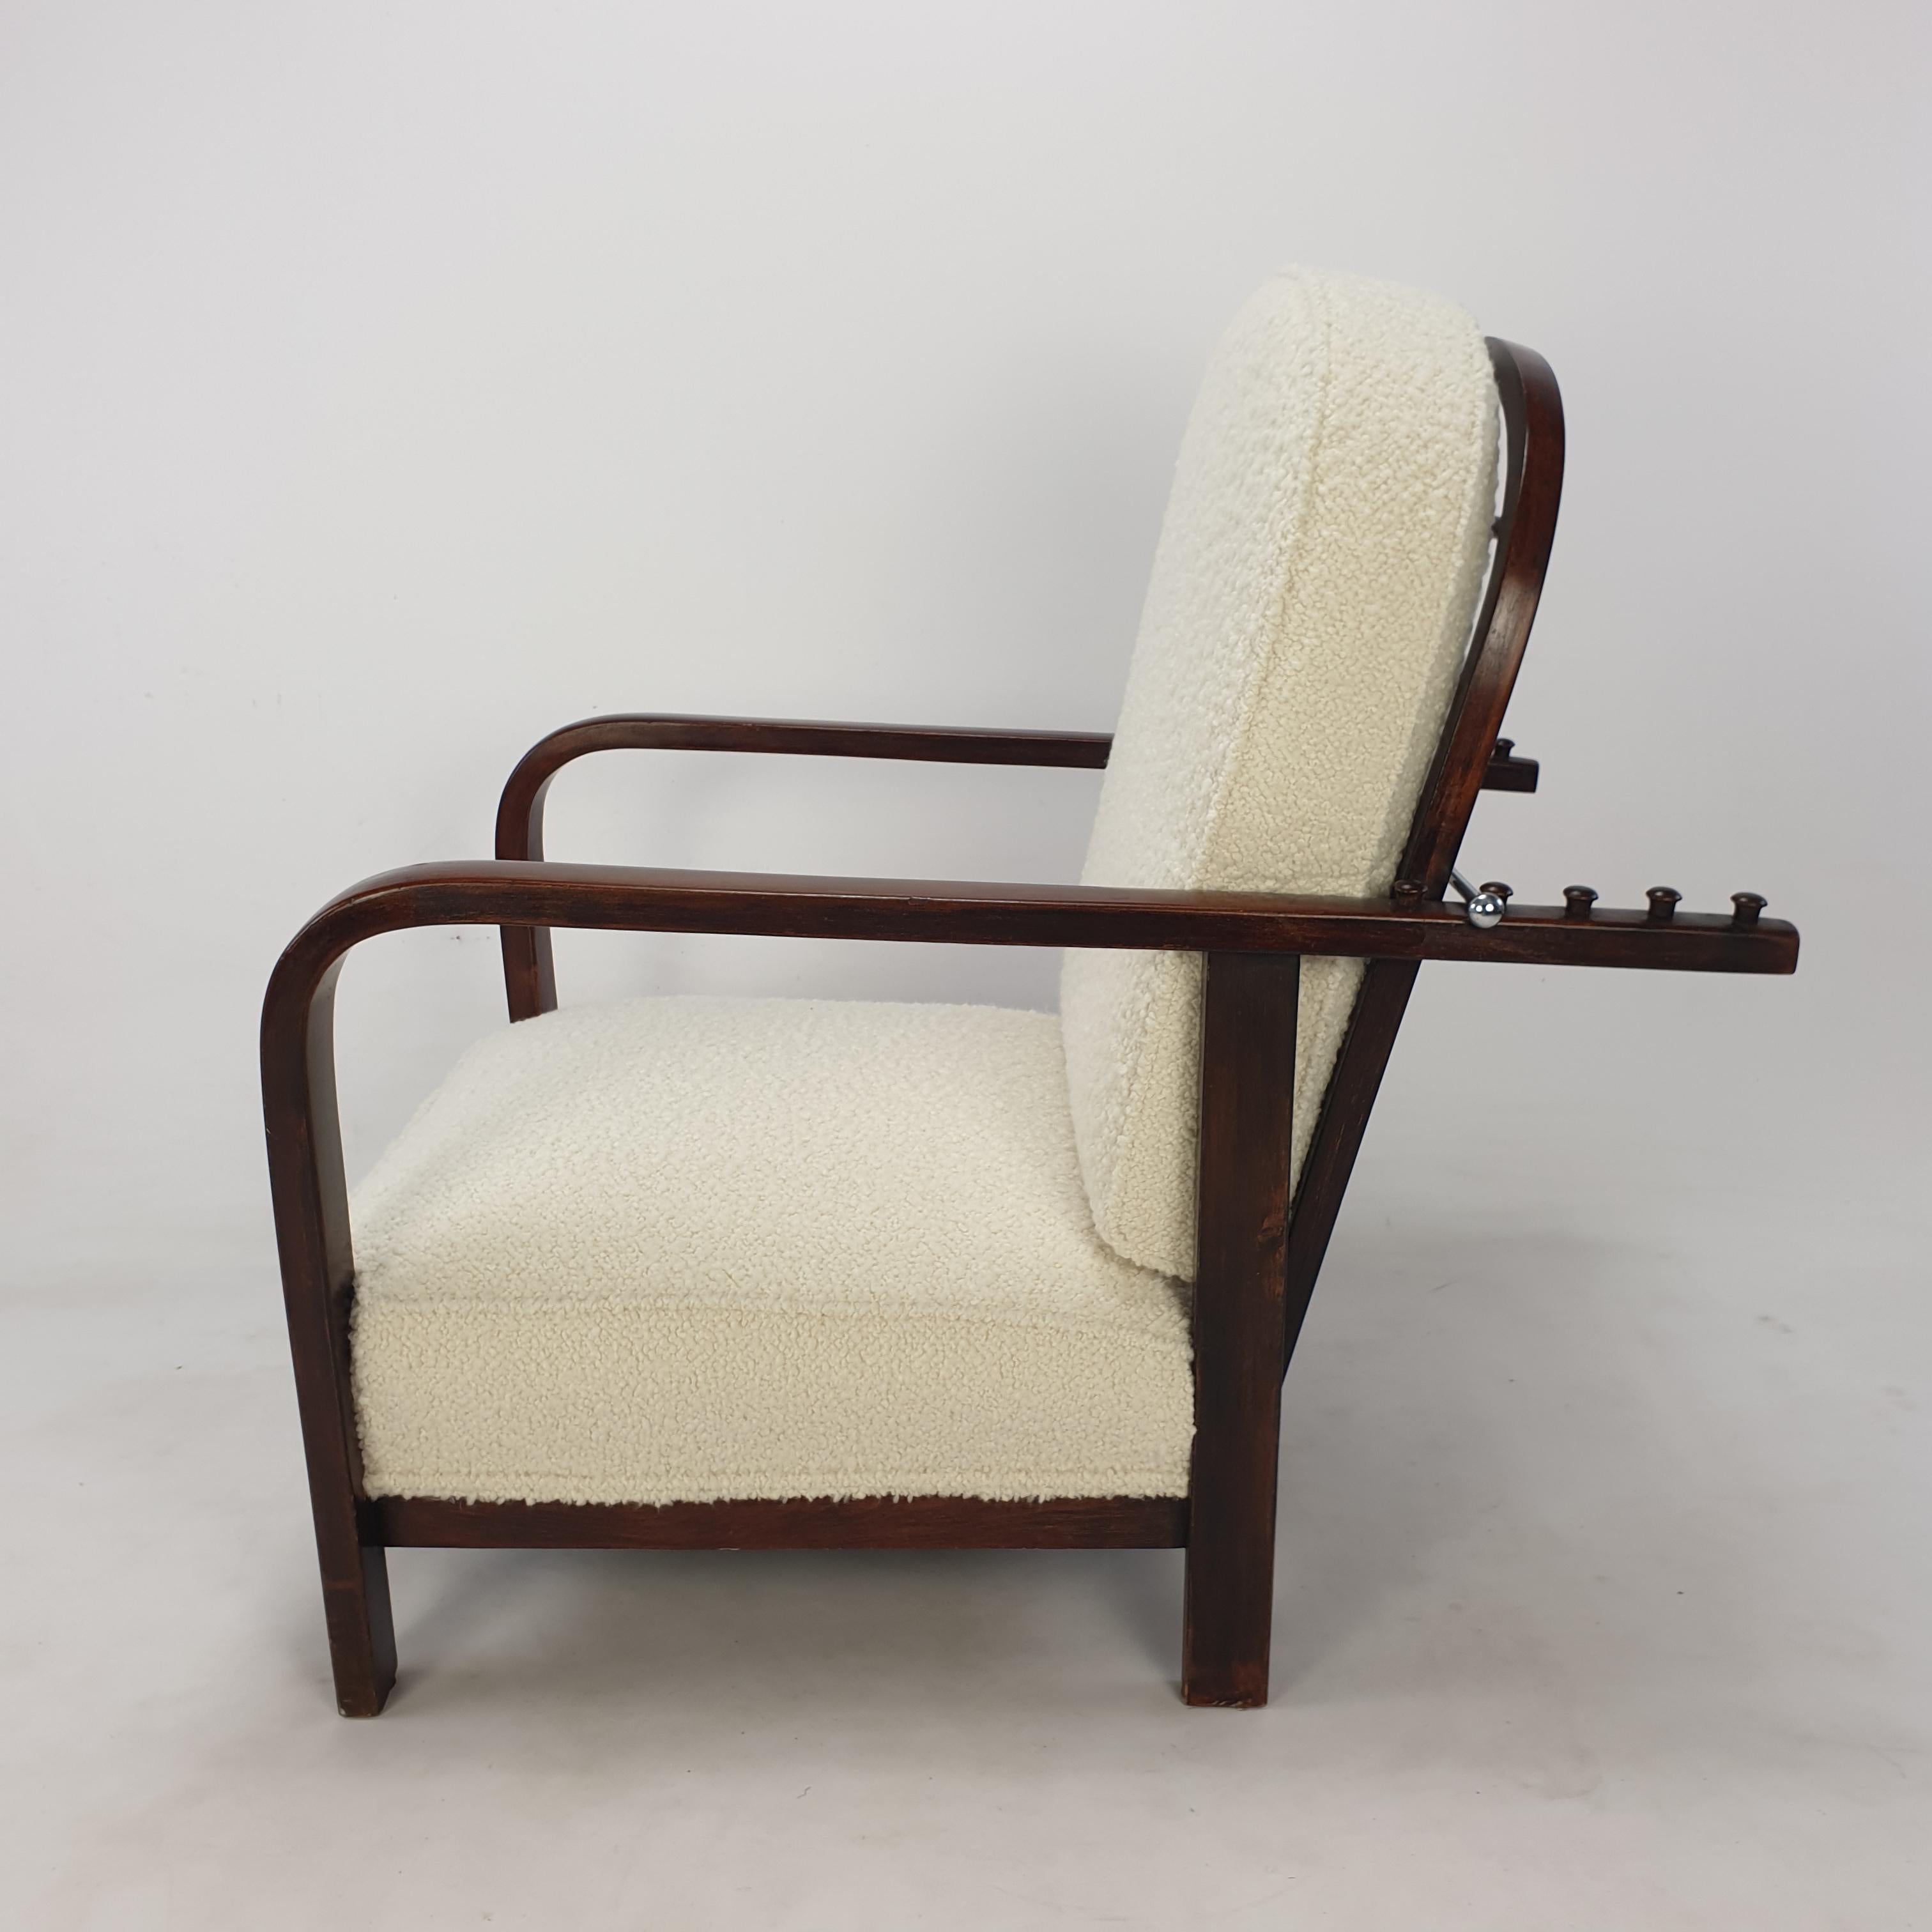 Pair of Adjustable Lounge Chairs by Thonet, 1930's For Sale 7